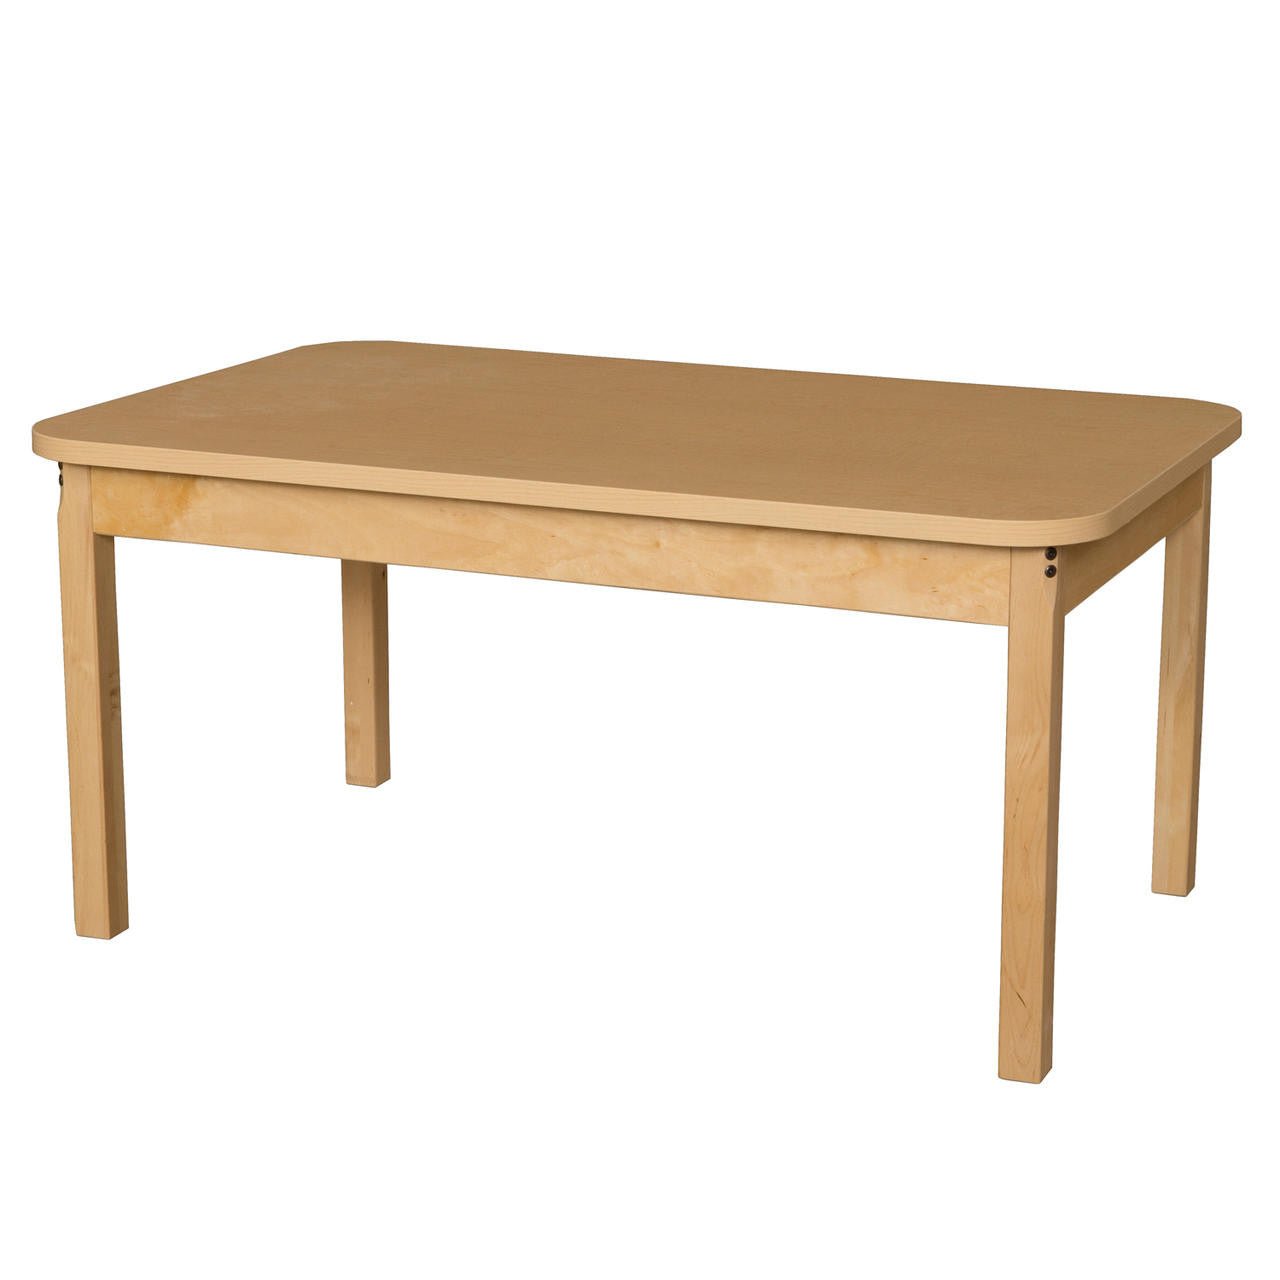 Rectangle High Pressure Laminate Table with Hardwood Legs- 22"